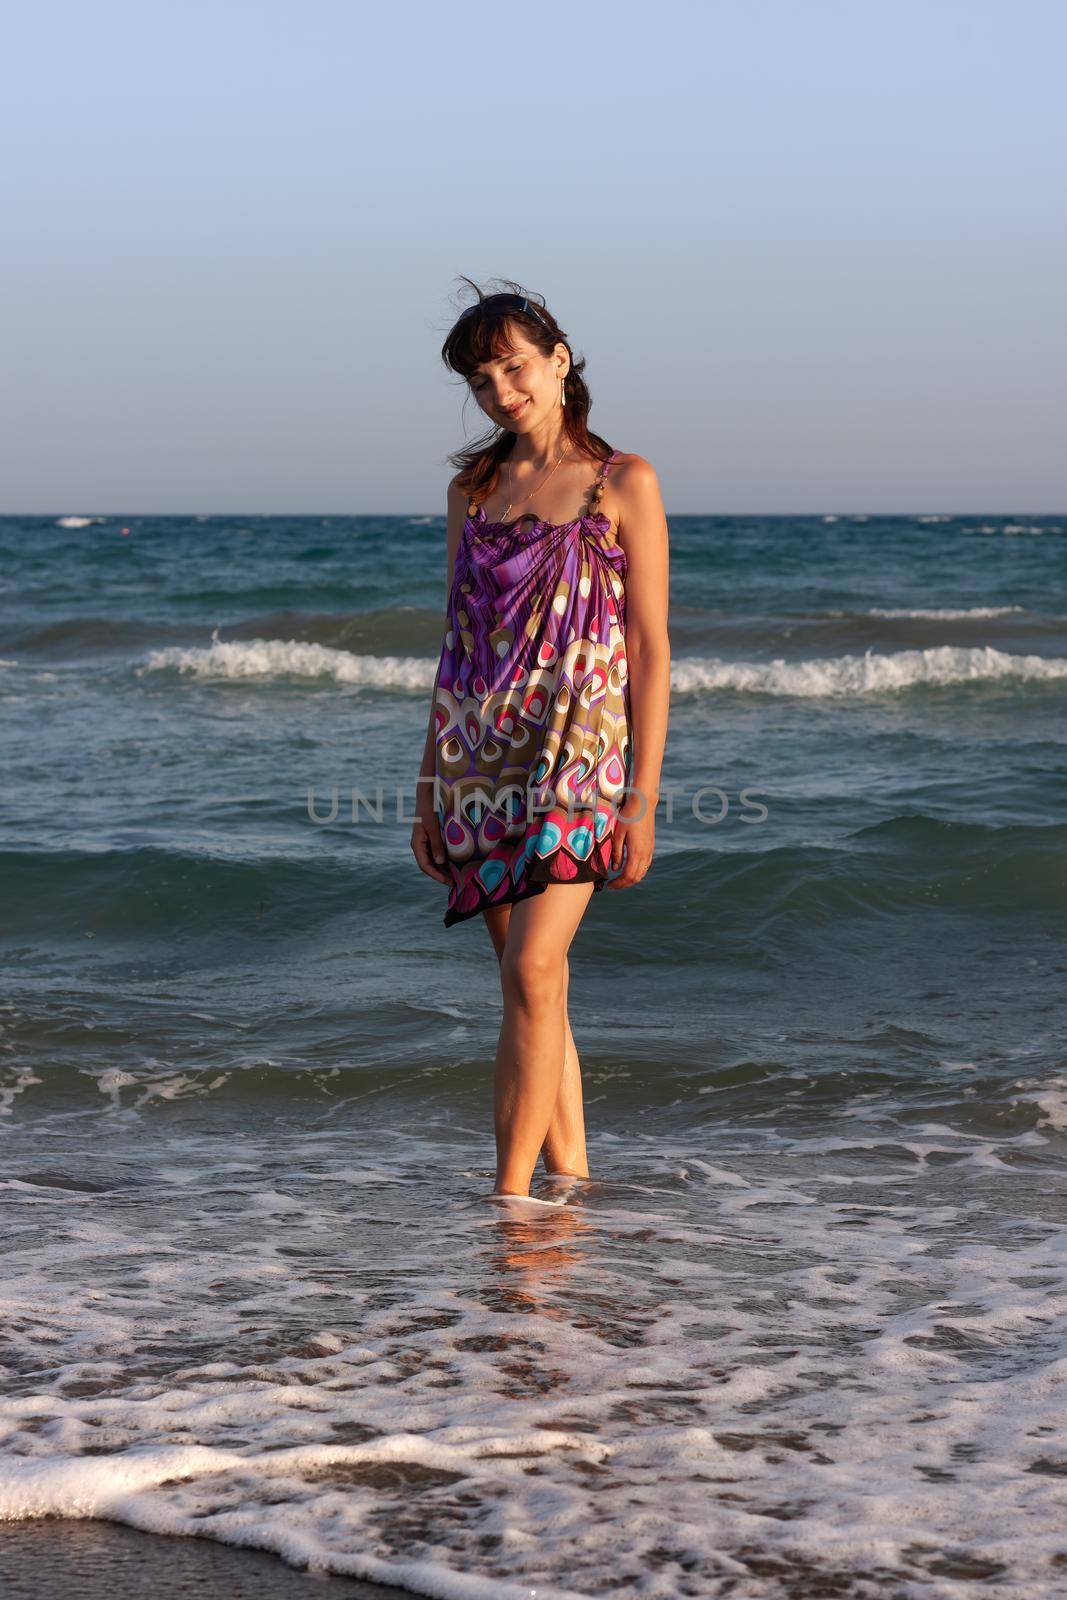 Young beautiful woman in a summer dress stands in the sea water on the sandy shore and enjoys the waves and the sea breeze